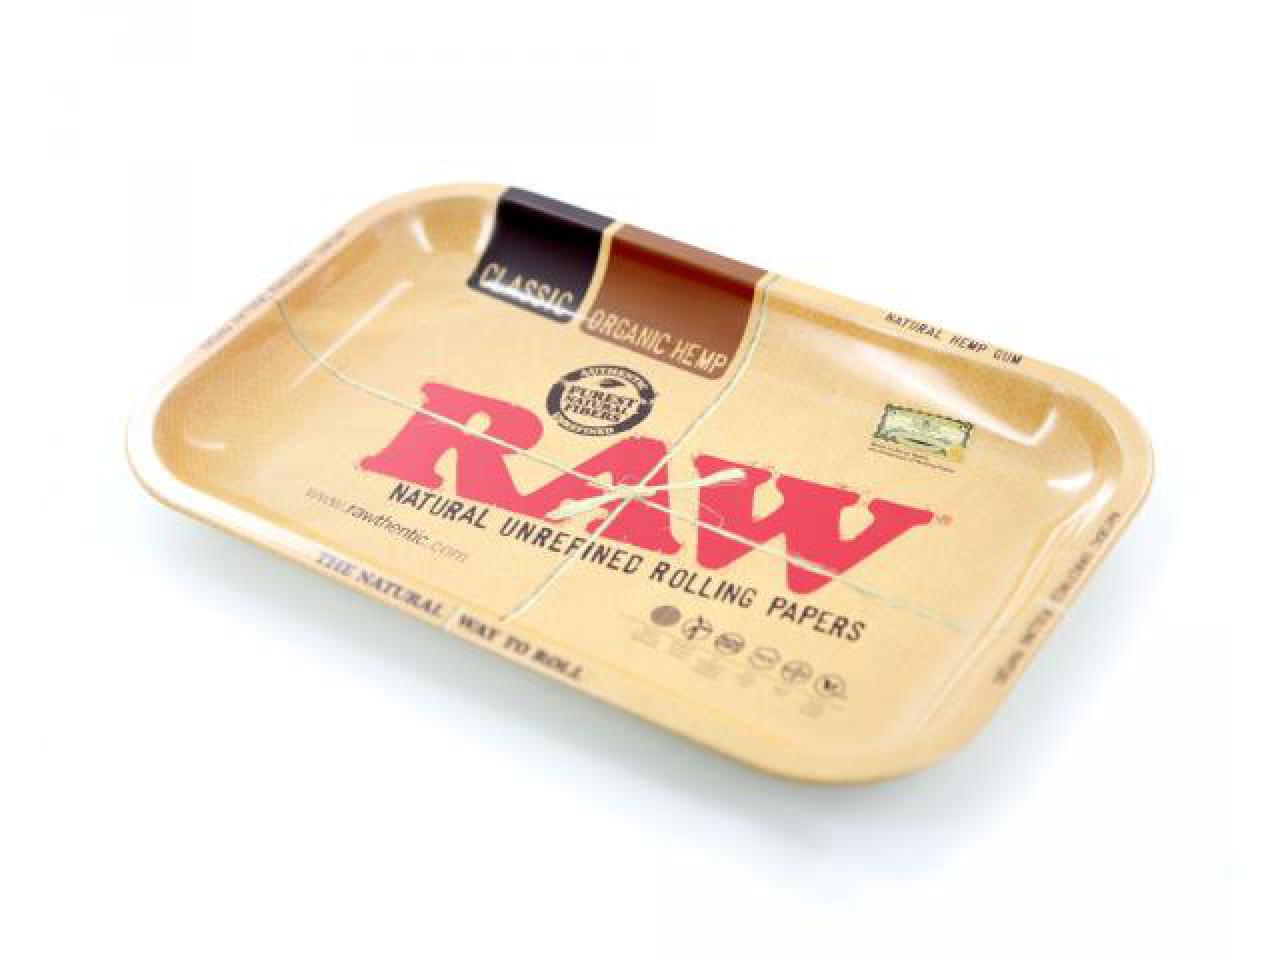 RAW papers | Metal Rolling Tray - kleines Tablett